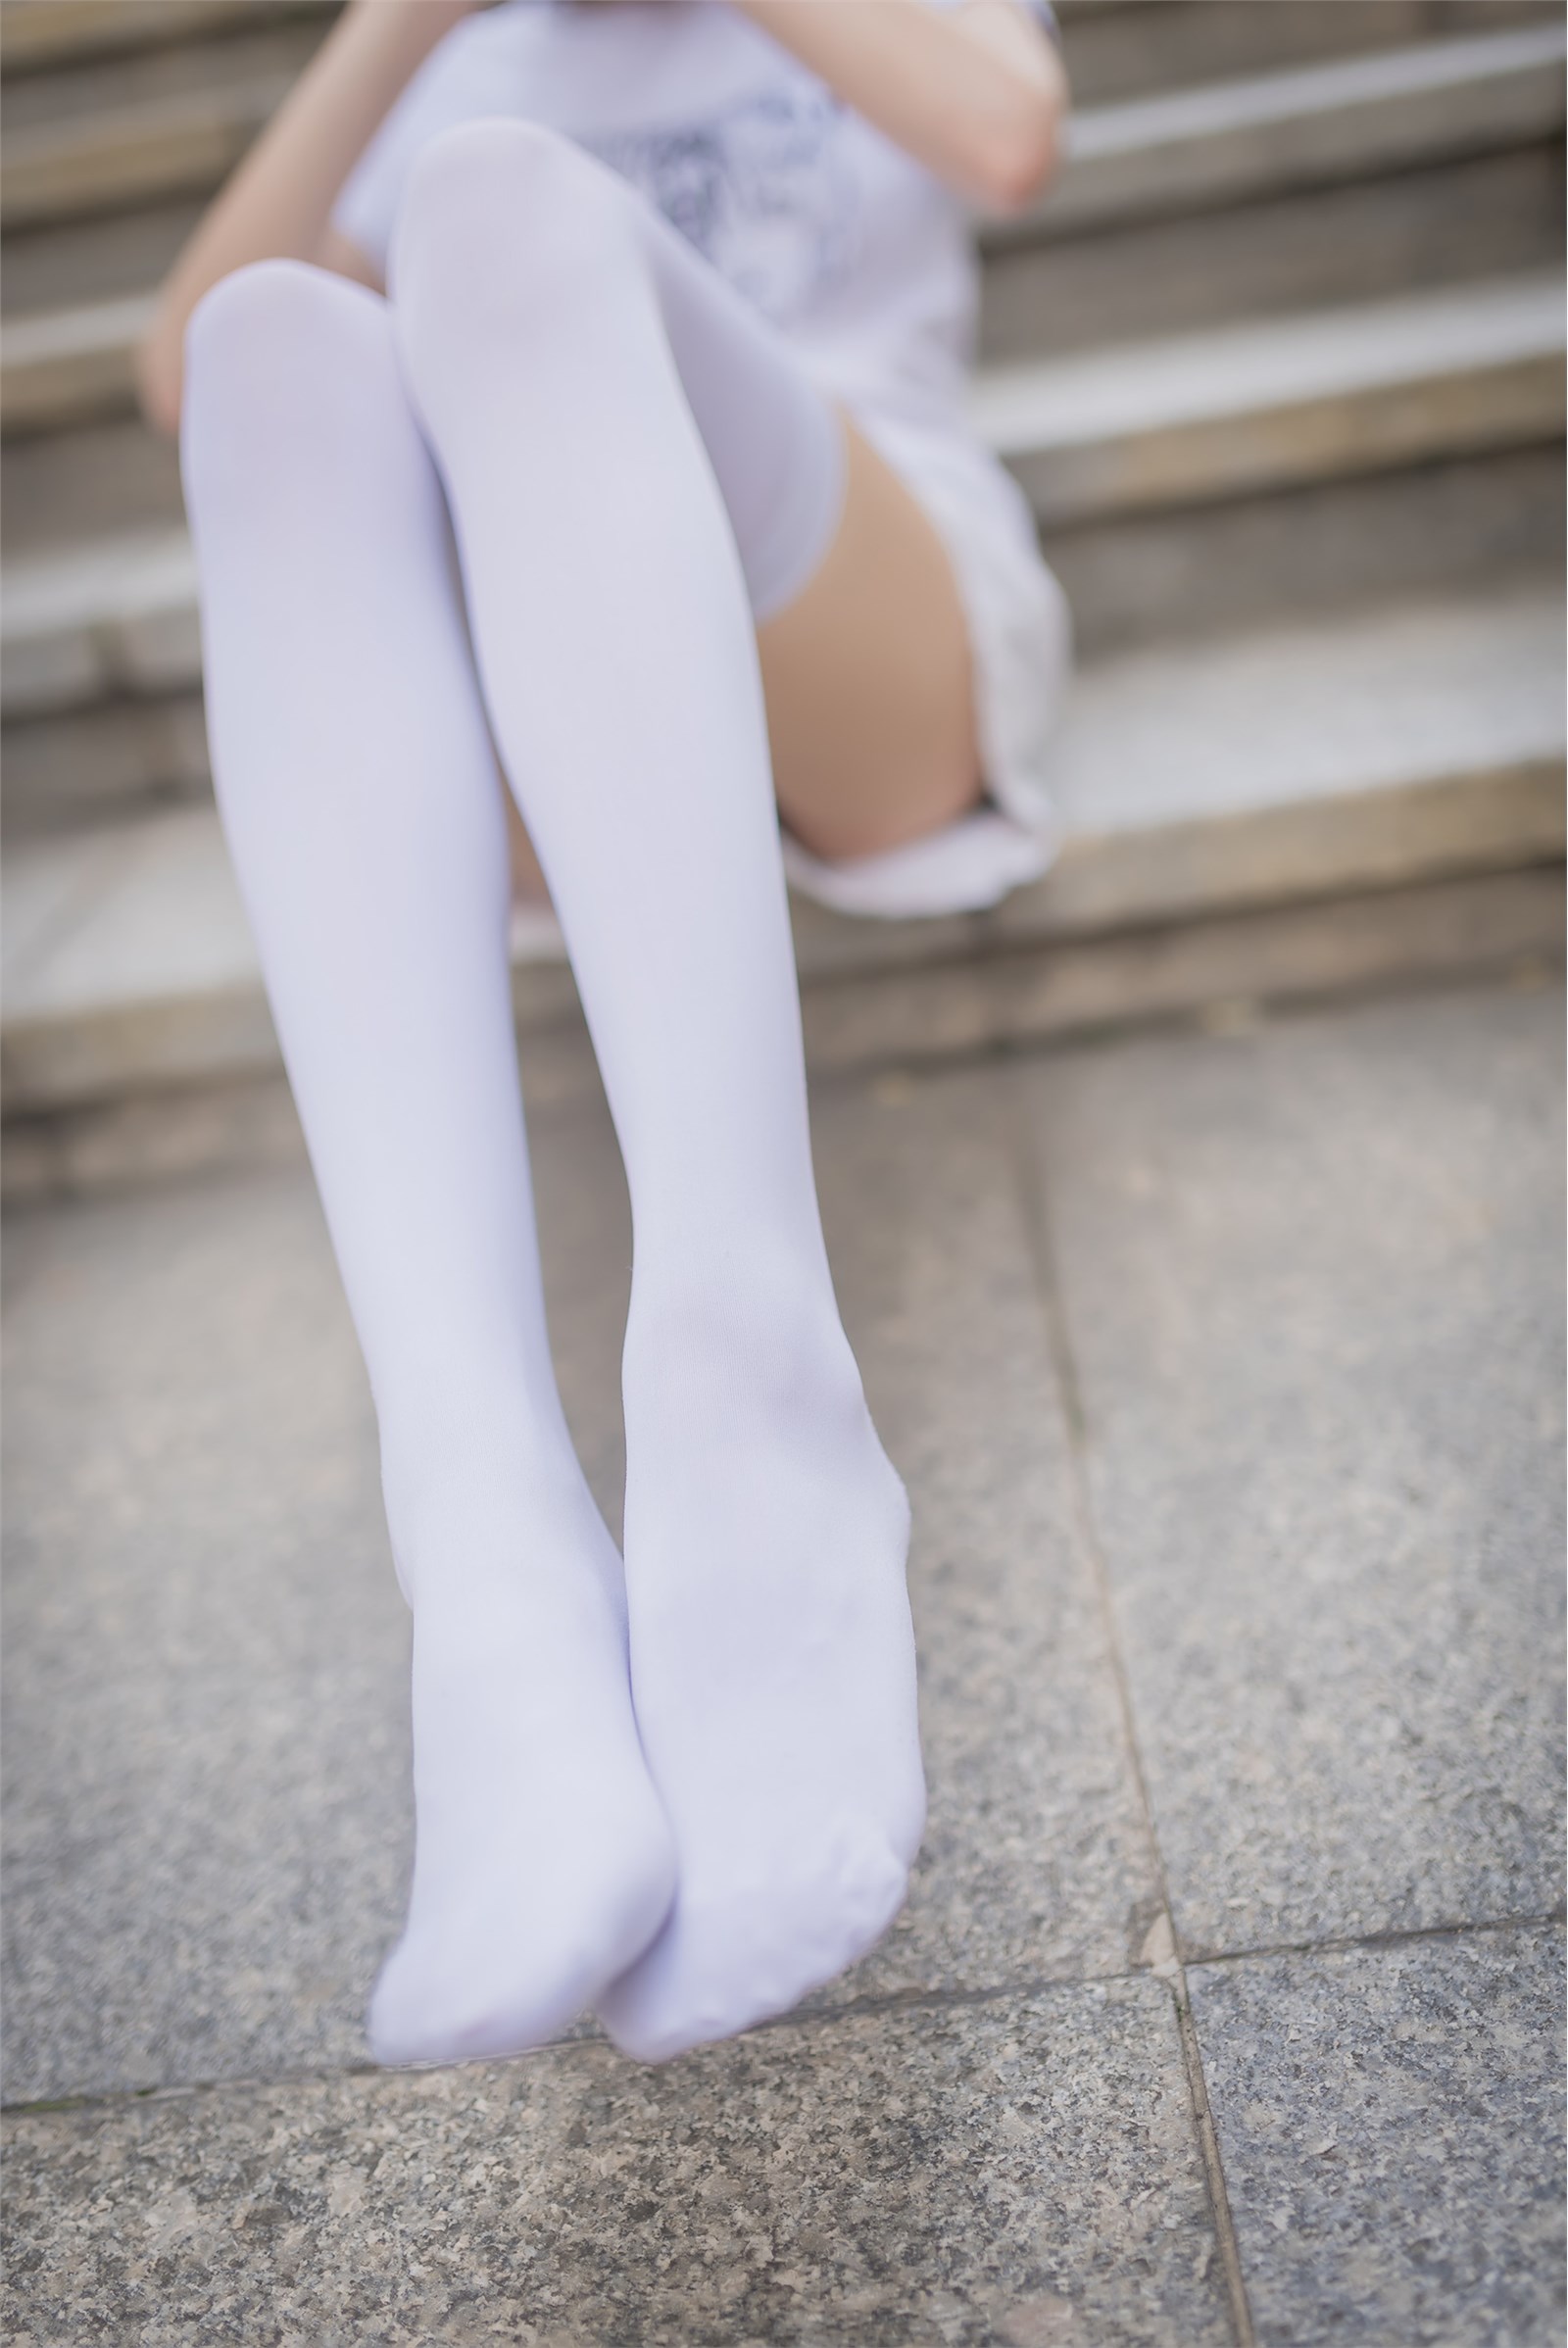 Rabbit plays with painted white stockings over the knee(4)